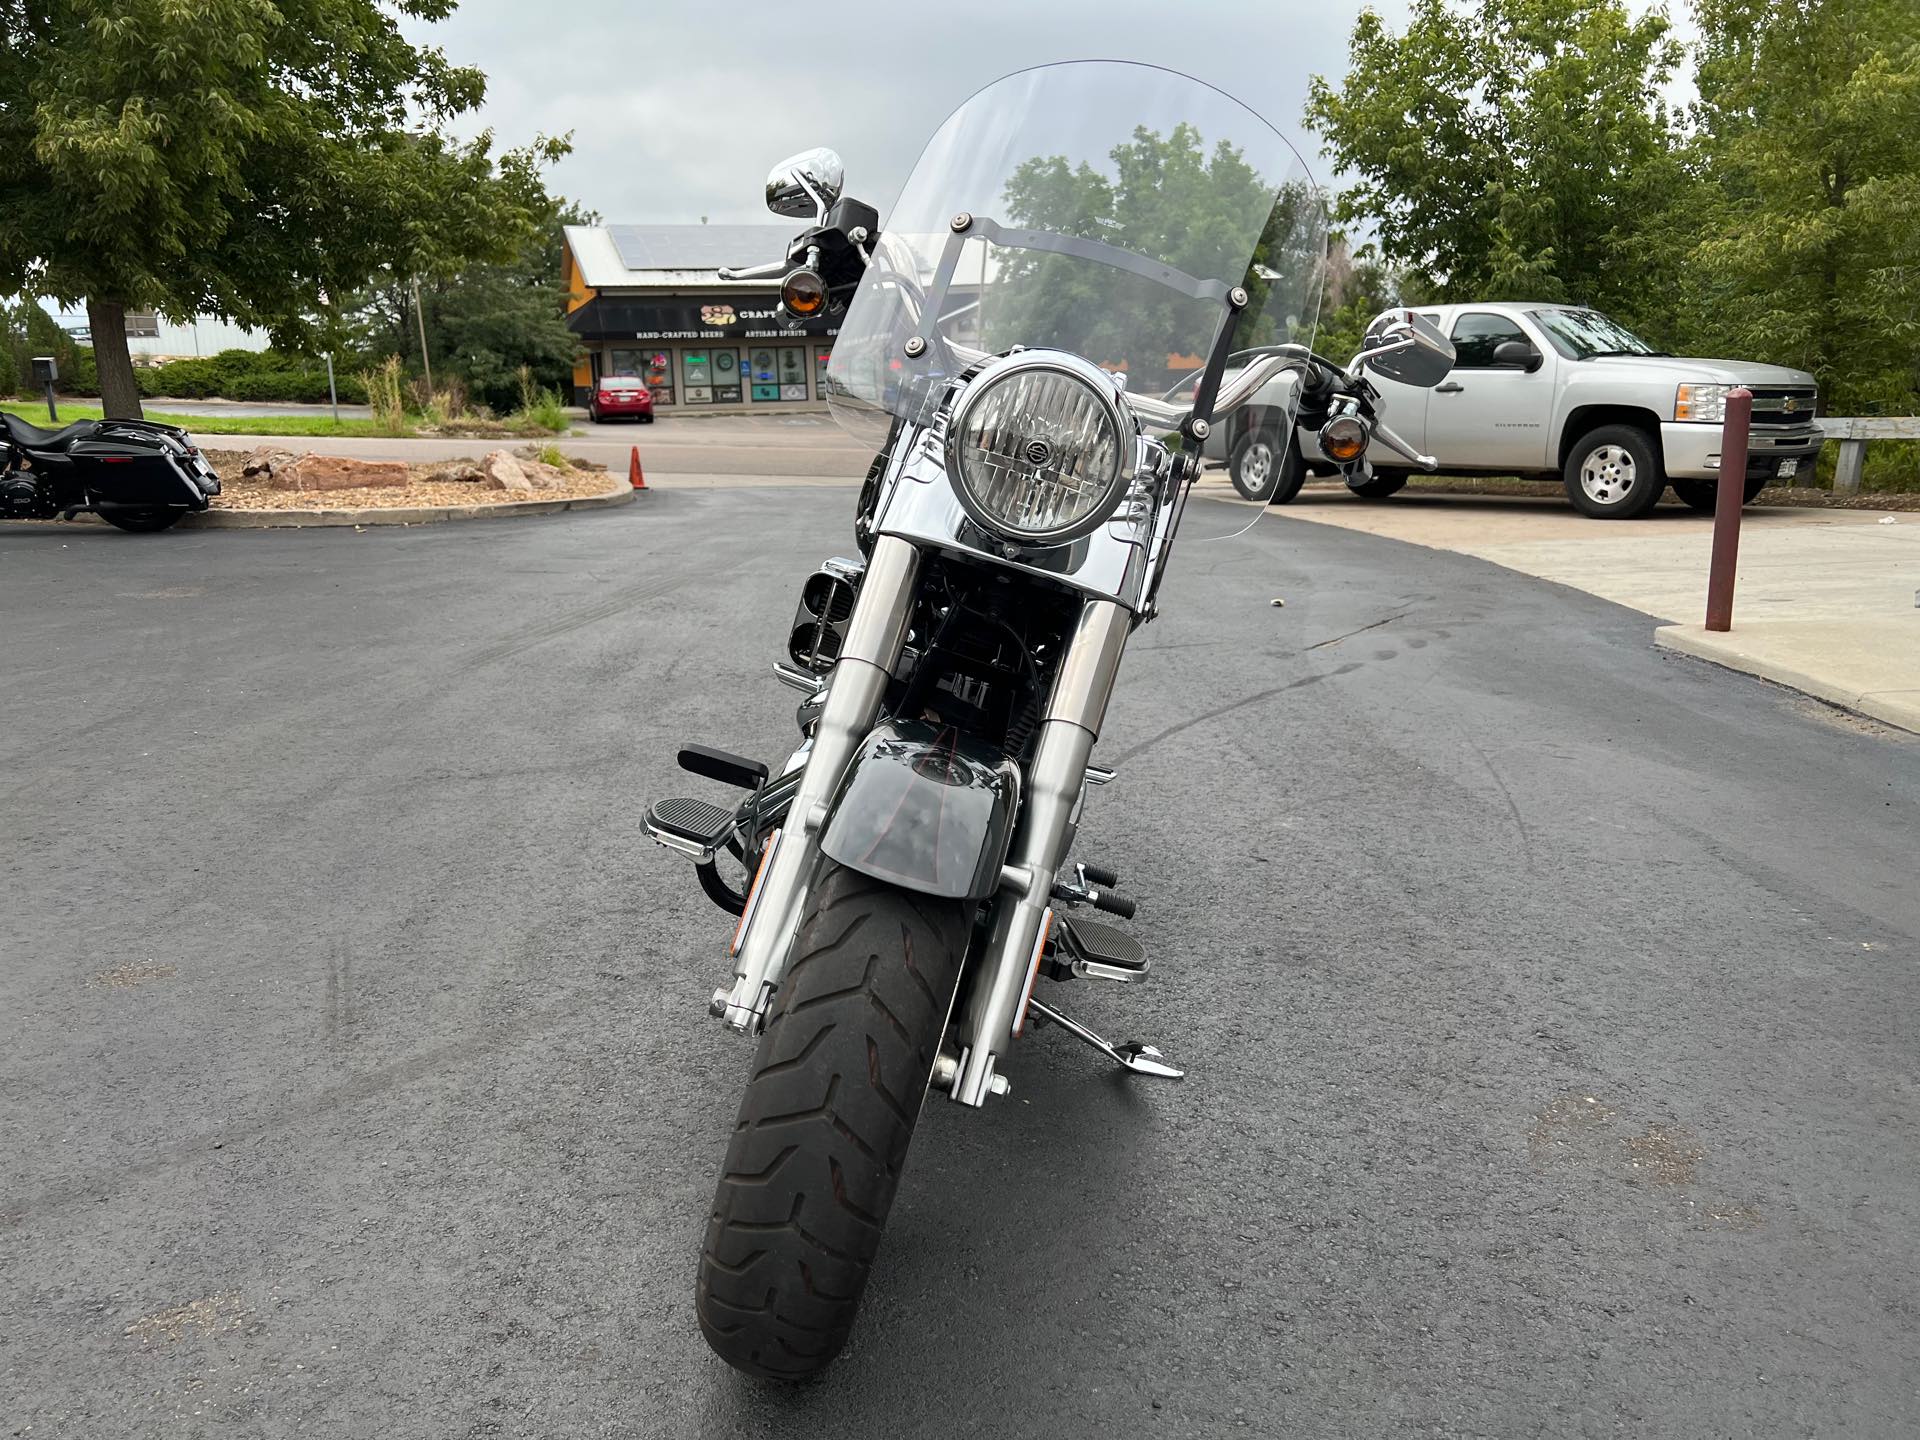 2009 Harley-Davidson Softail Fat Boy at Aces Motorcycles - Fort Collins